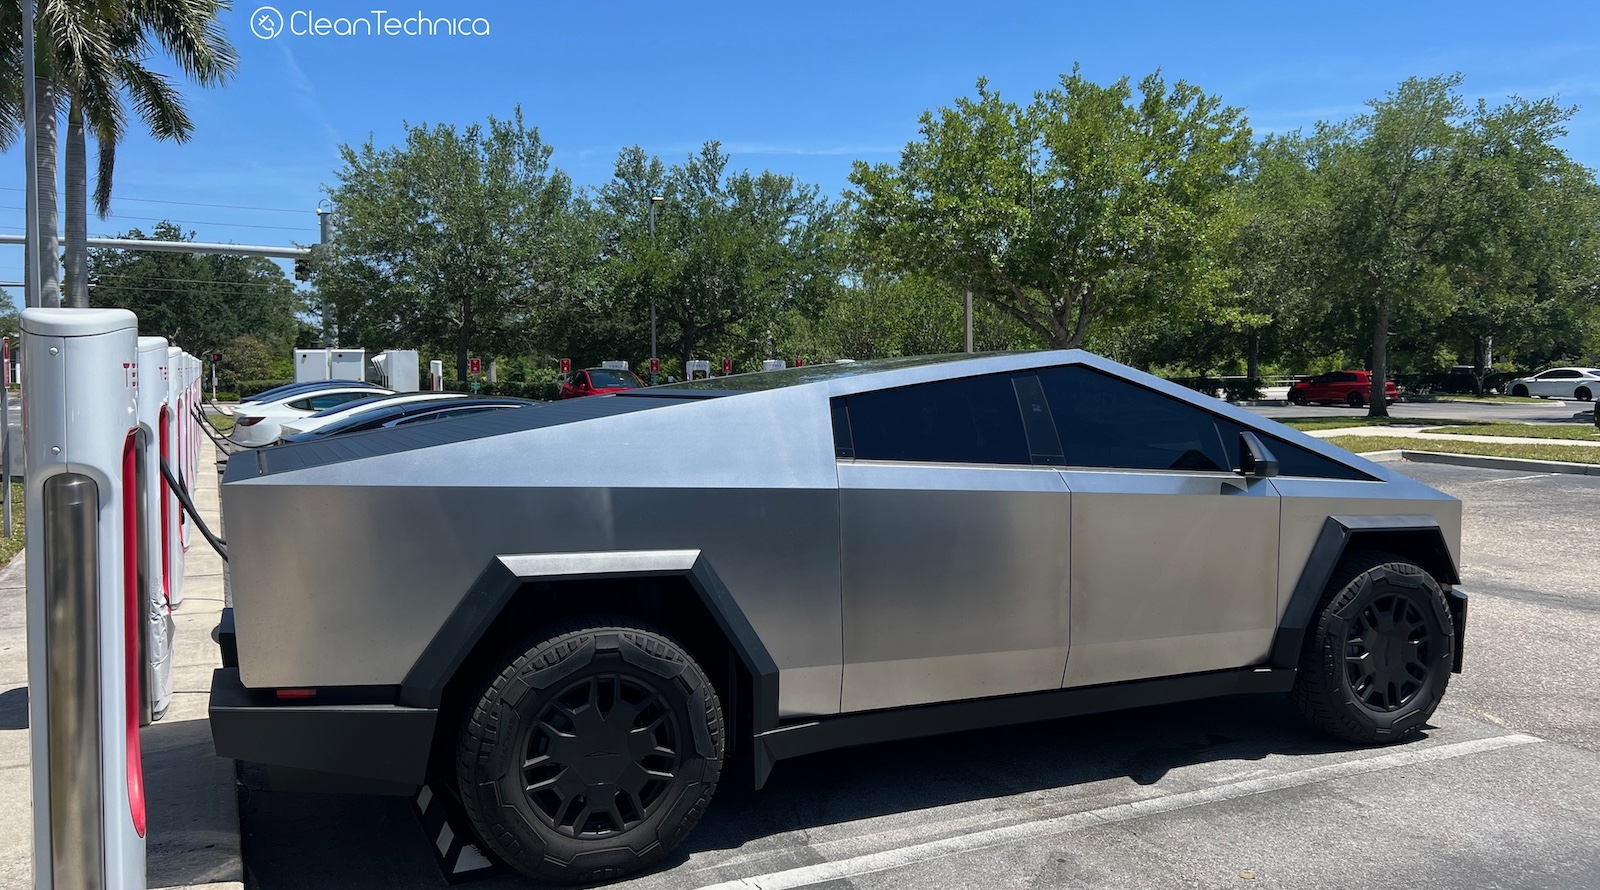 Tesla Cybertruck Might Already Be Passing Ford F-150 Lightning & Rivian R1T — Truck Wars Over?